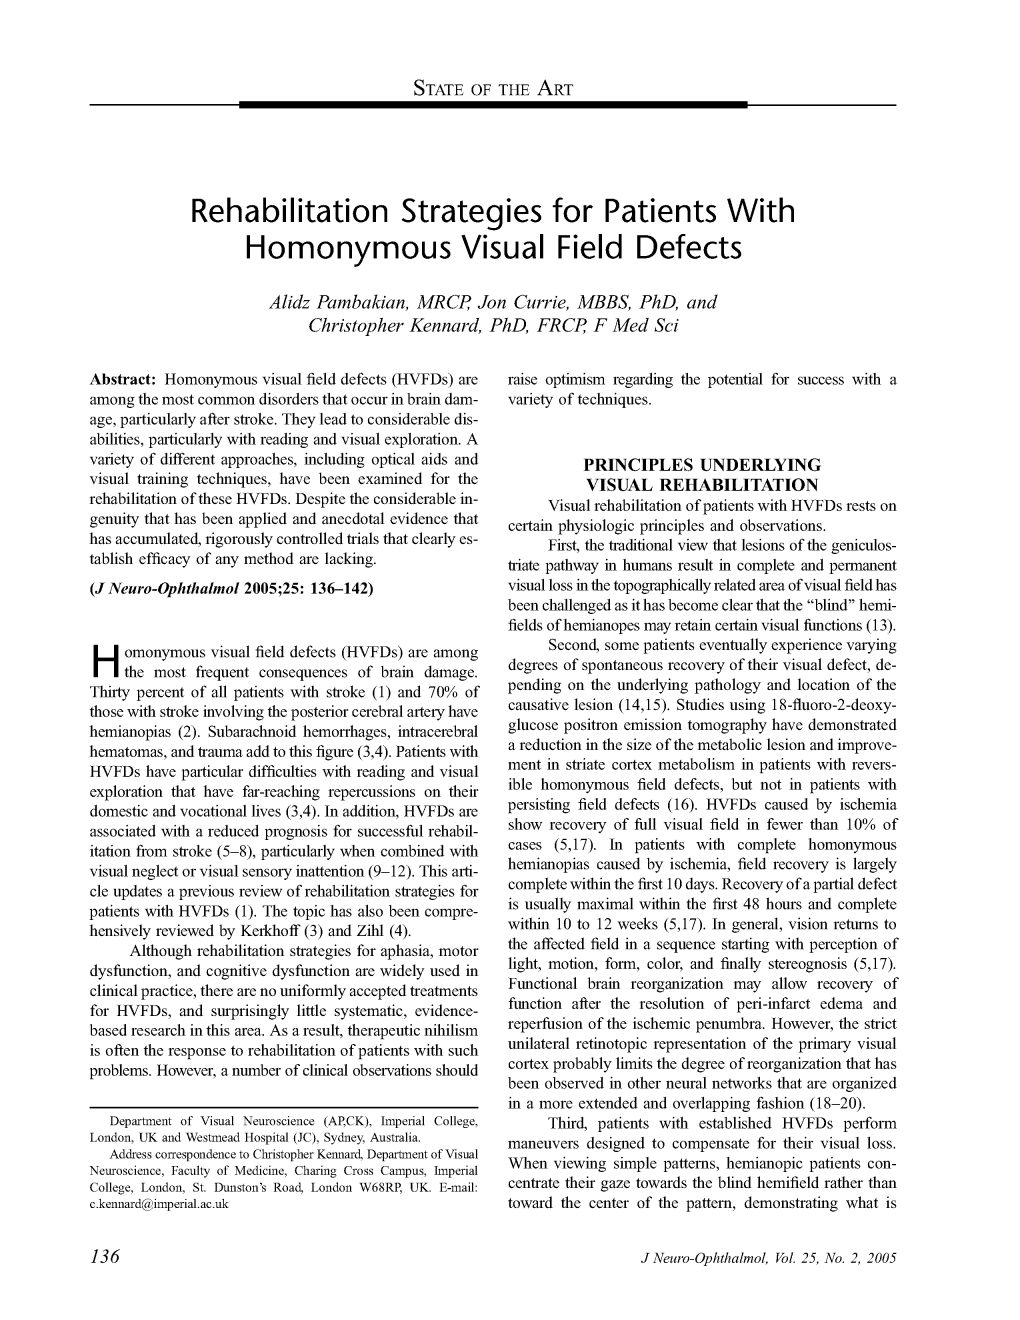 Rehabilitation Strategies for Patients with Homonymous Visual Field Defects